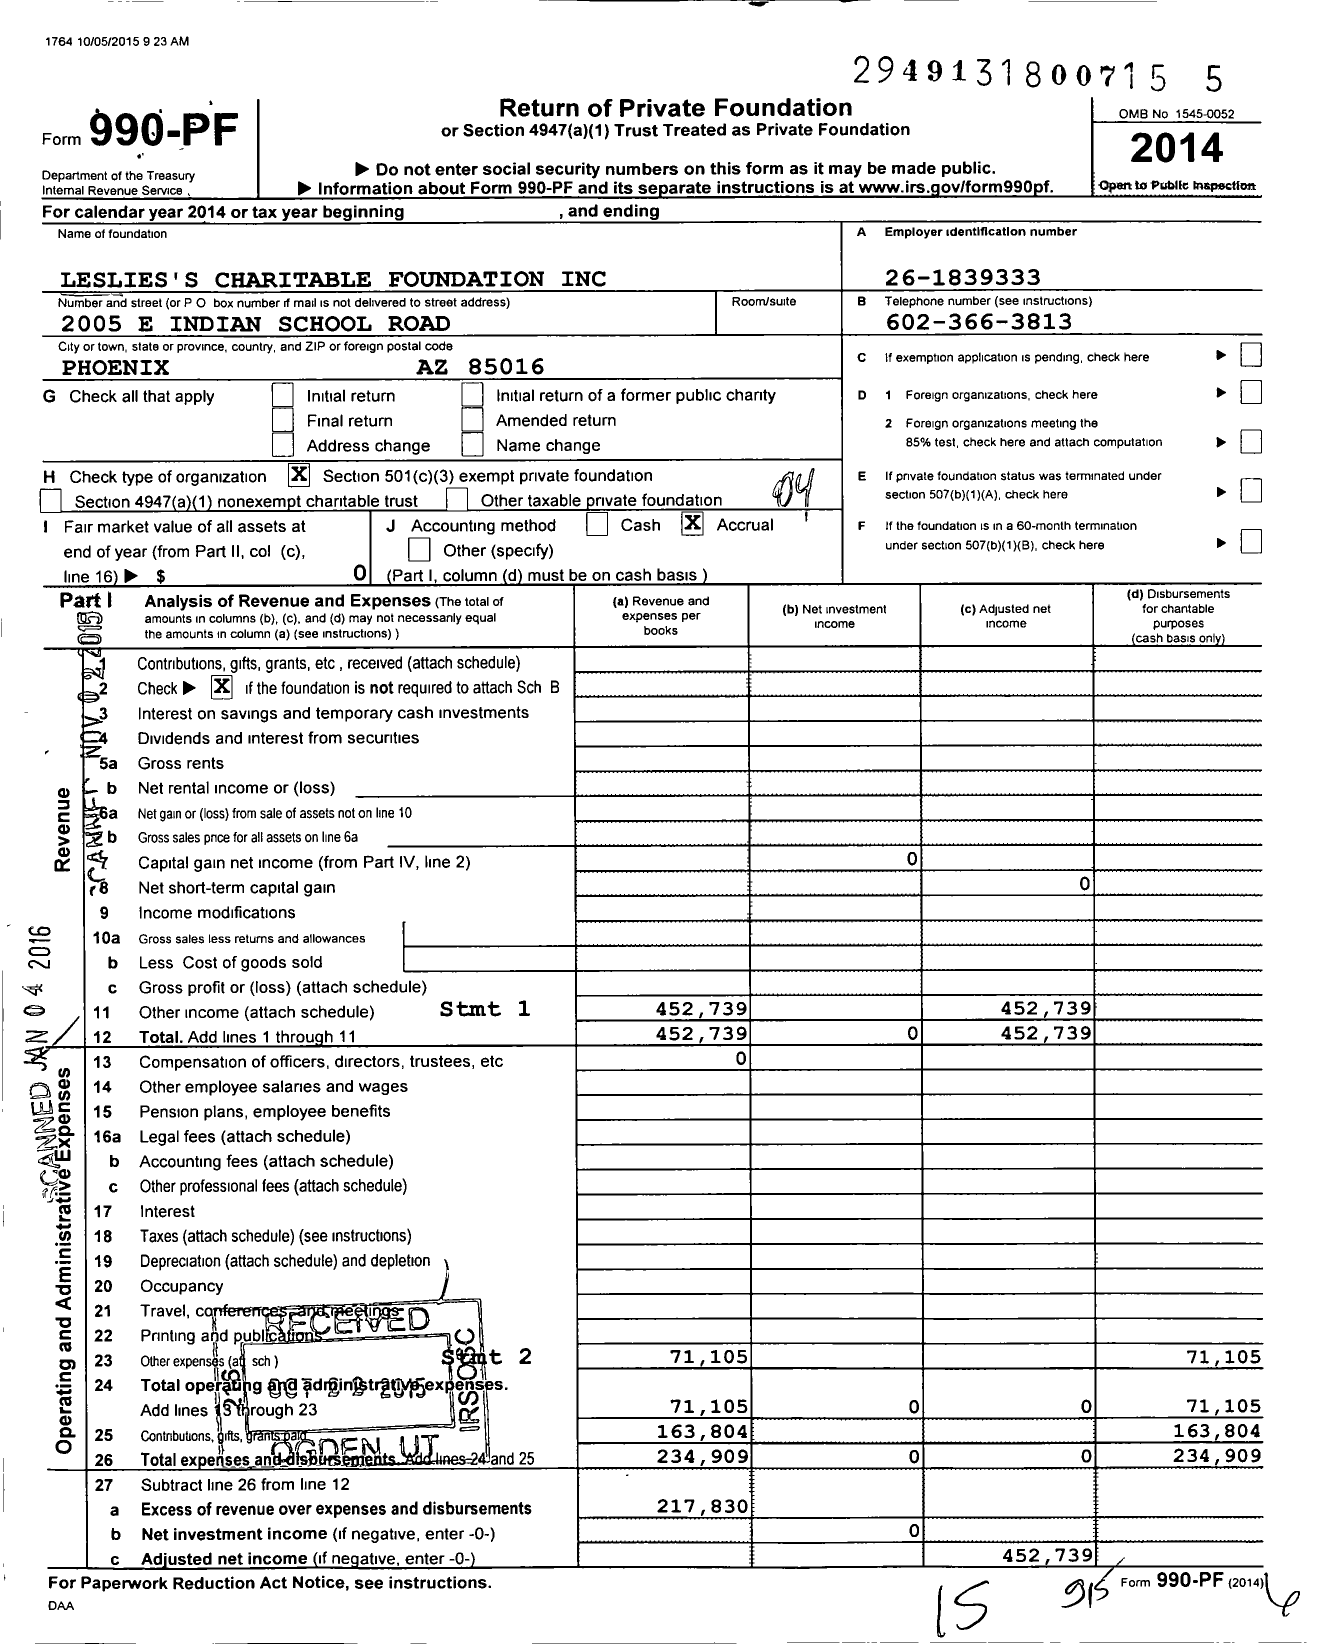 Image of first page of 2014 Form 990PF for Lesliess Charitable Foundation